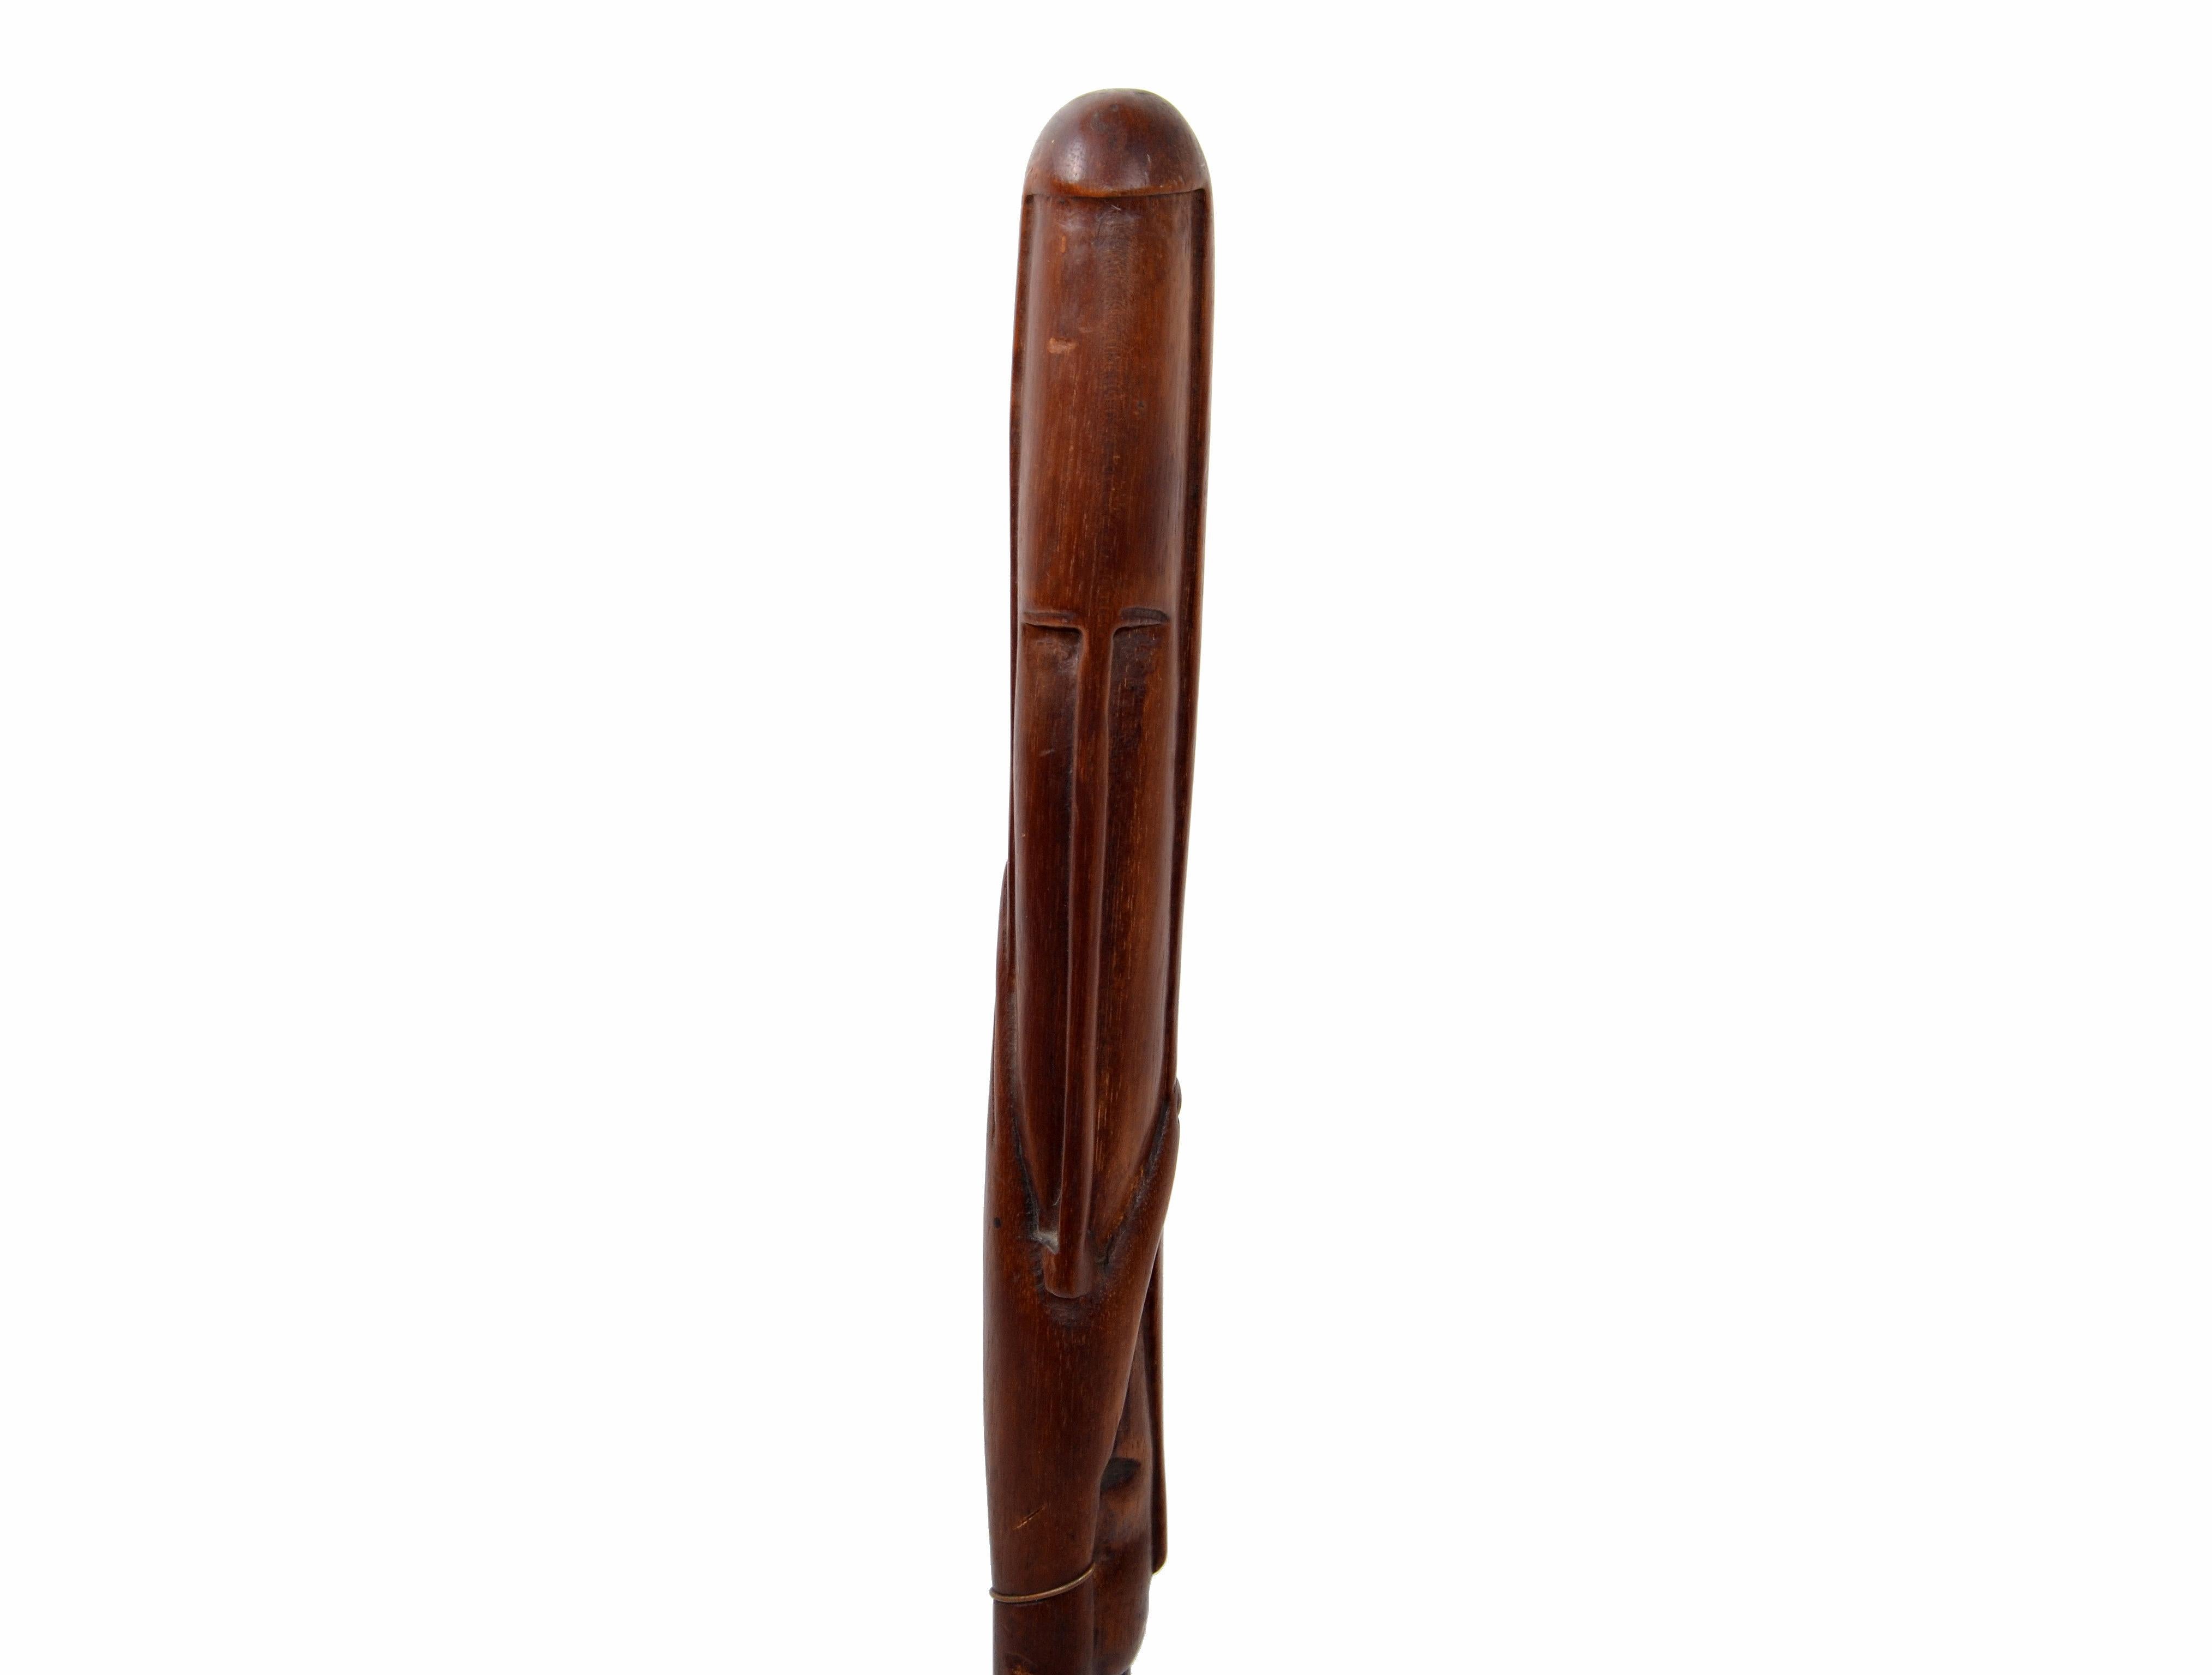 African tribal art hand carved mahogany wooden sculpture, decorative object.
Abstract figure on a wooden base.
Measure of the mahogany piece alone is 23.5 inches.